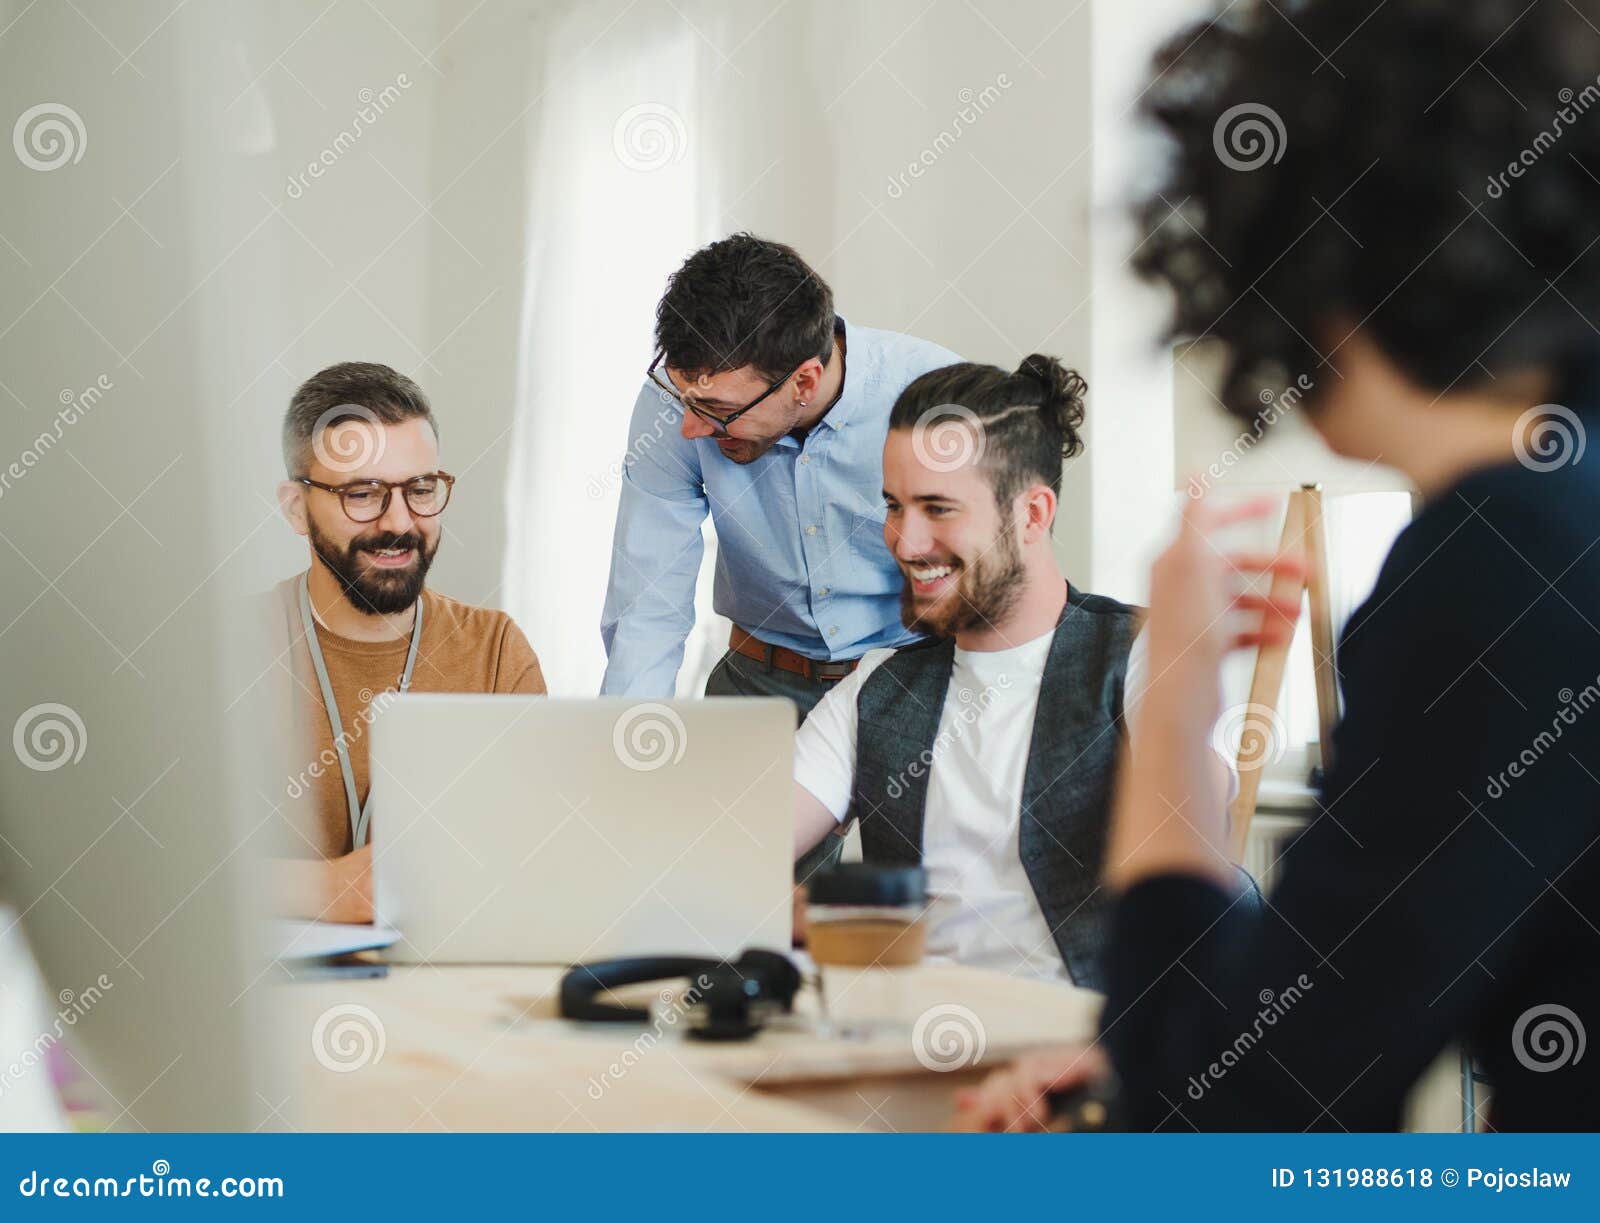 Group of Young Businesspeople with Laptop Working Together in a Modern ...